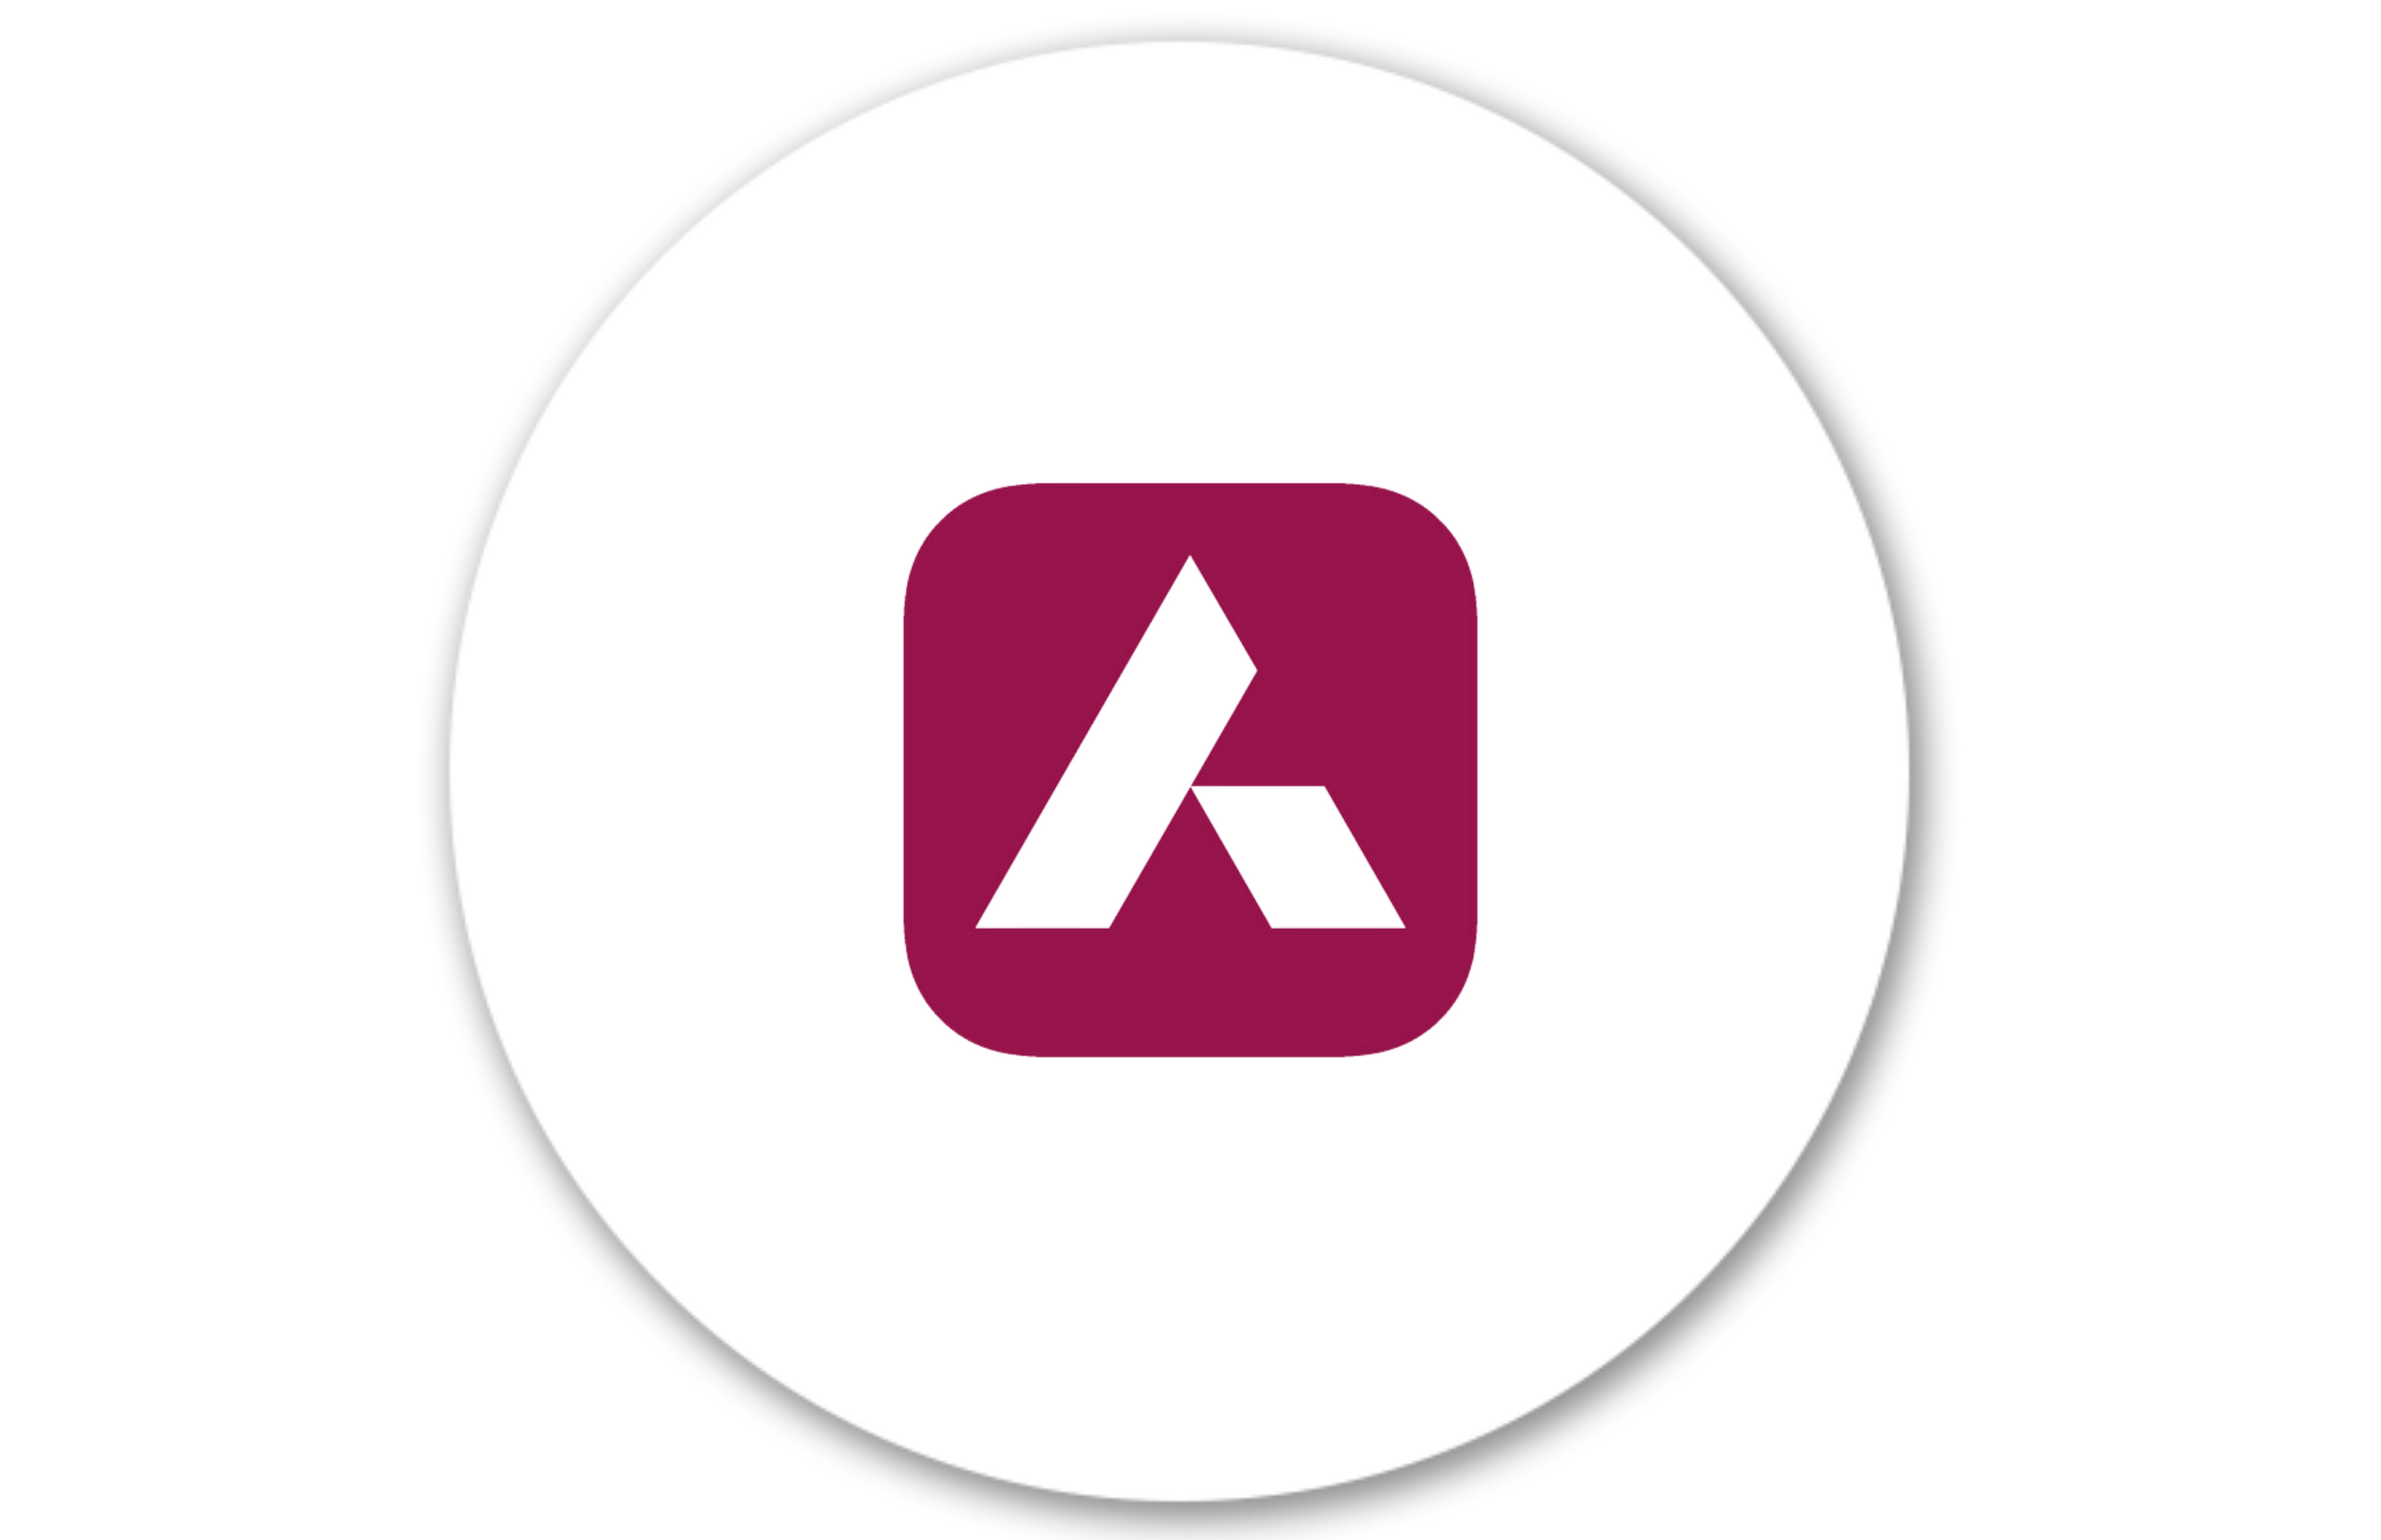  Axis Bank Credit Cards